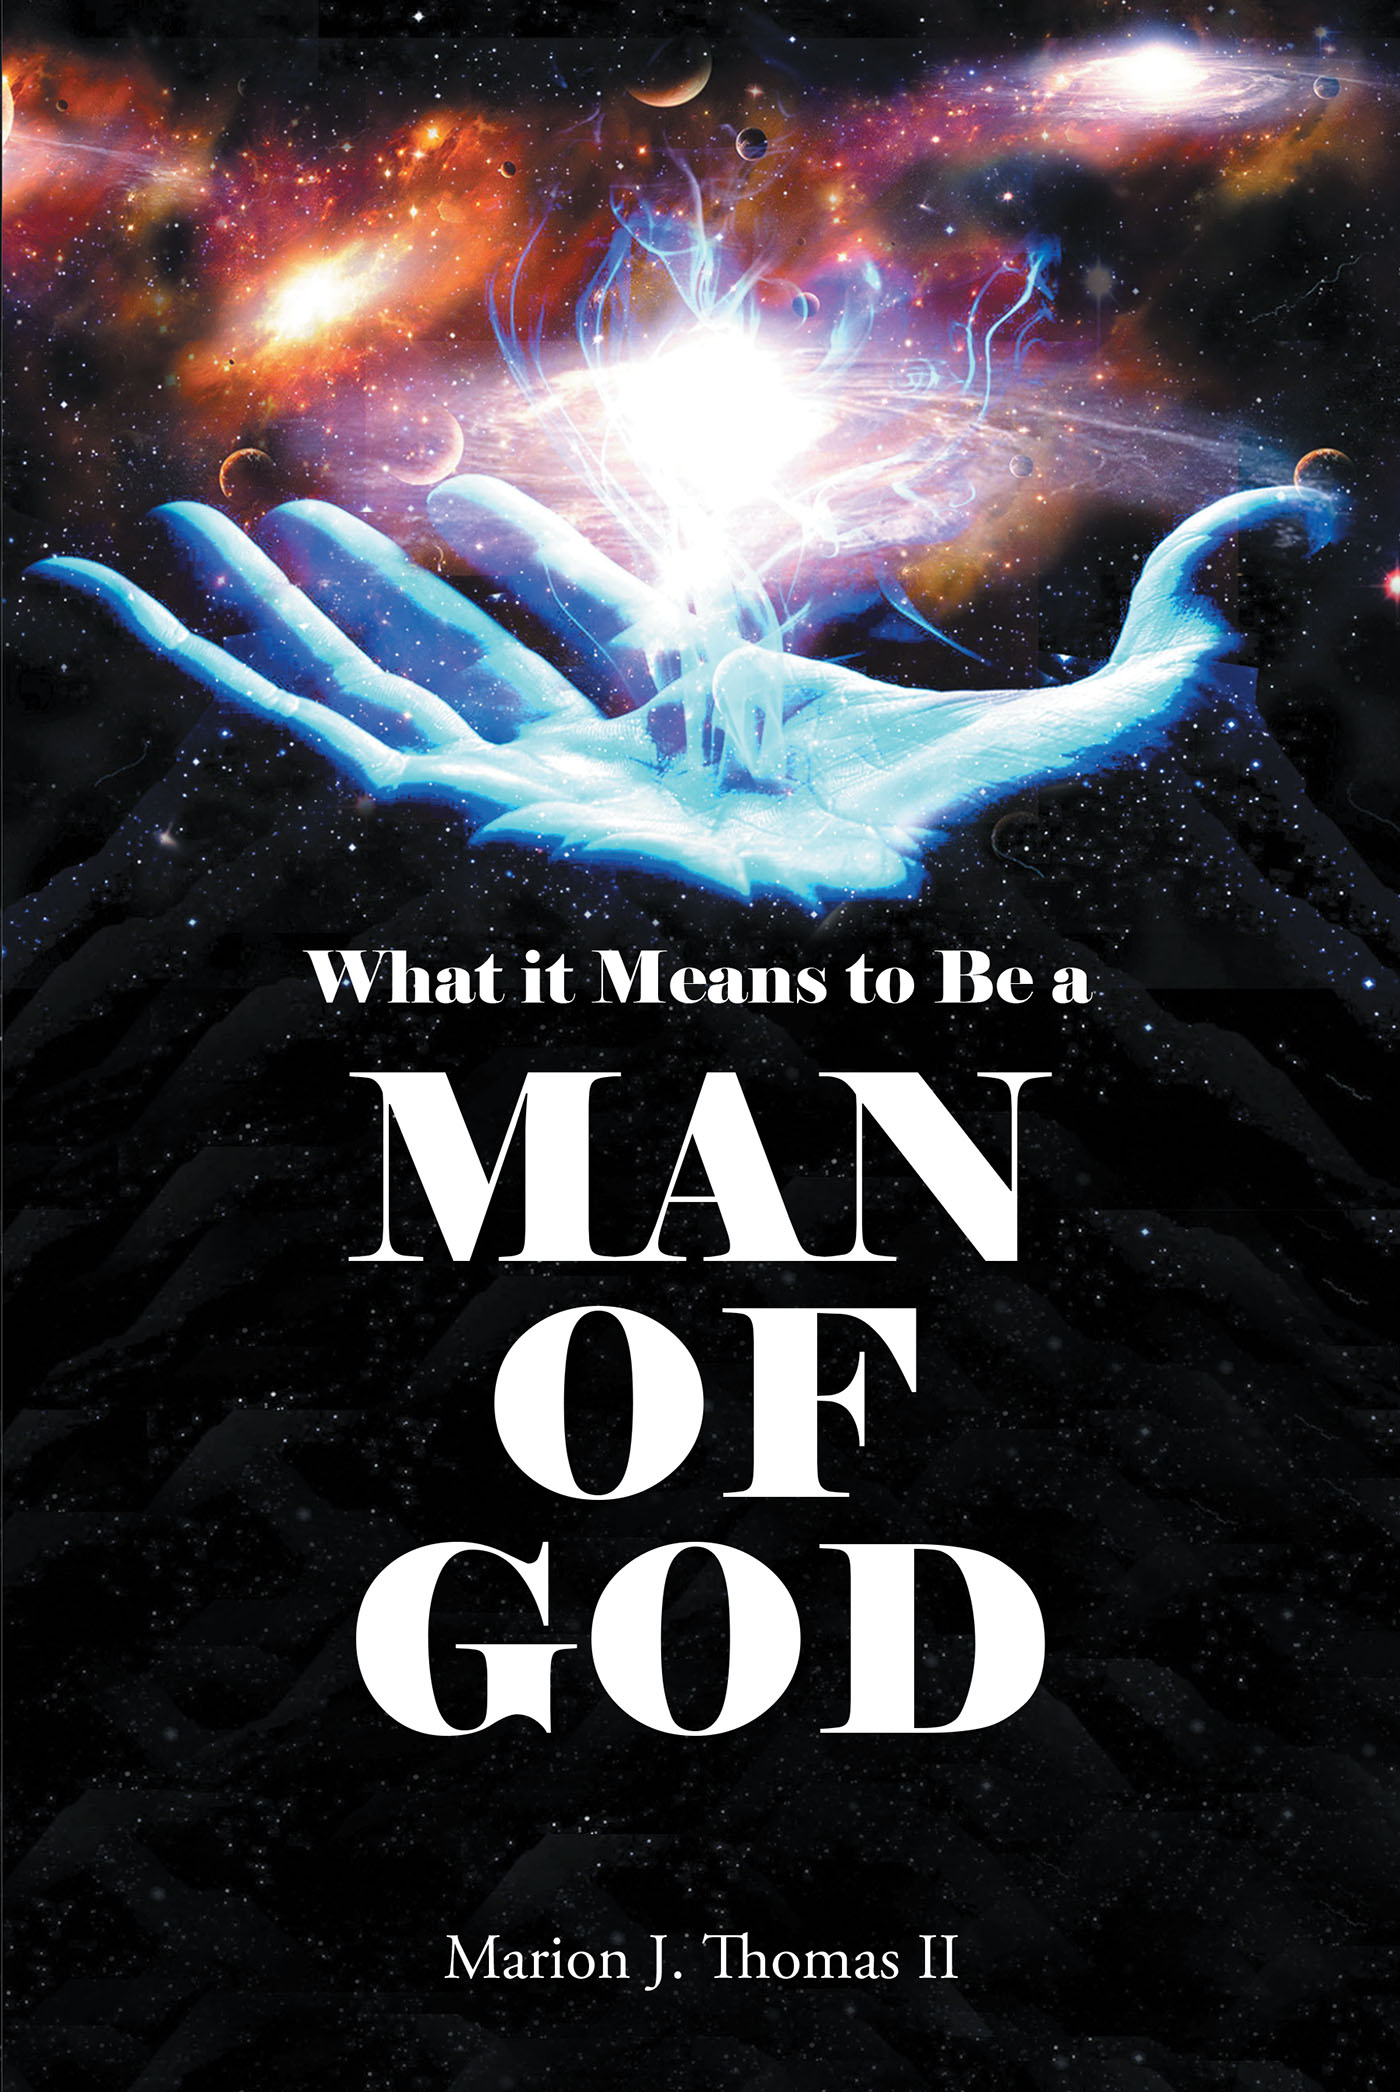 Marion J. Thomas II’s Newly Released “What it Means to Be: A MAN OF GOD” is a Clarion Call to Men of the World to Live as God Intended